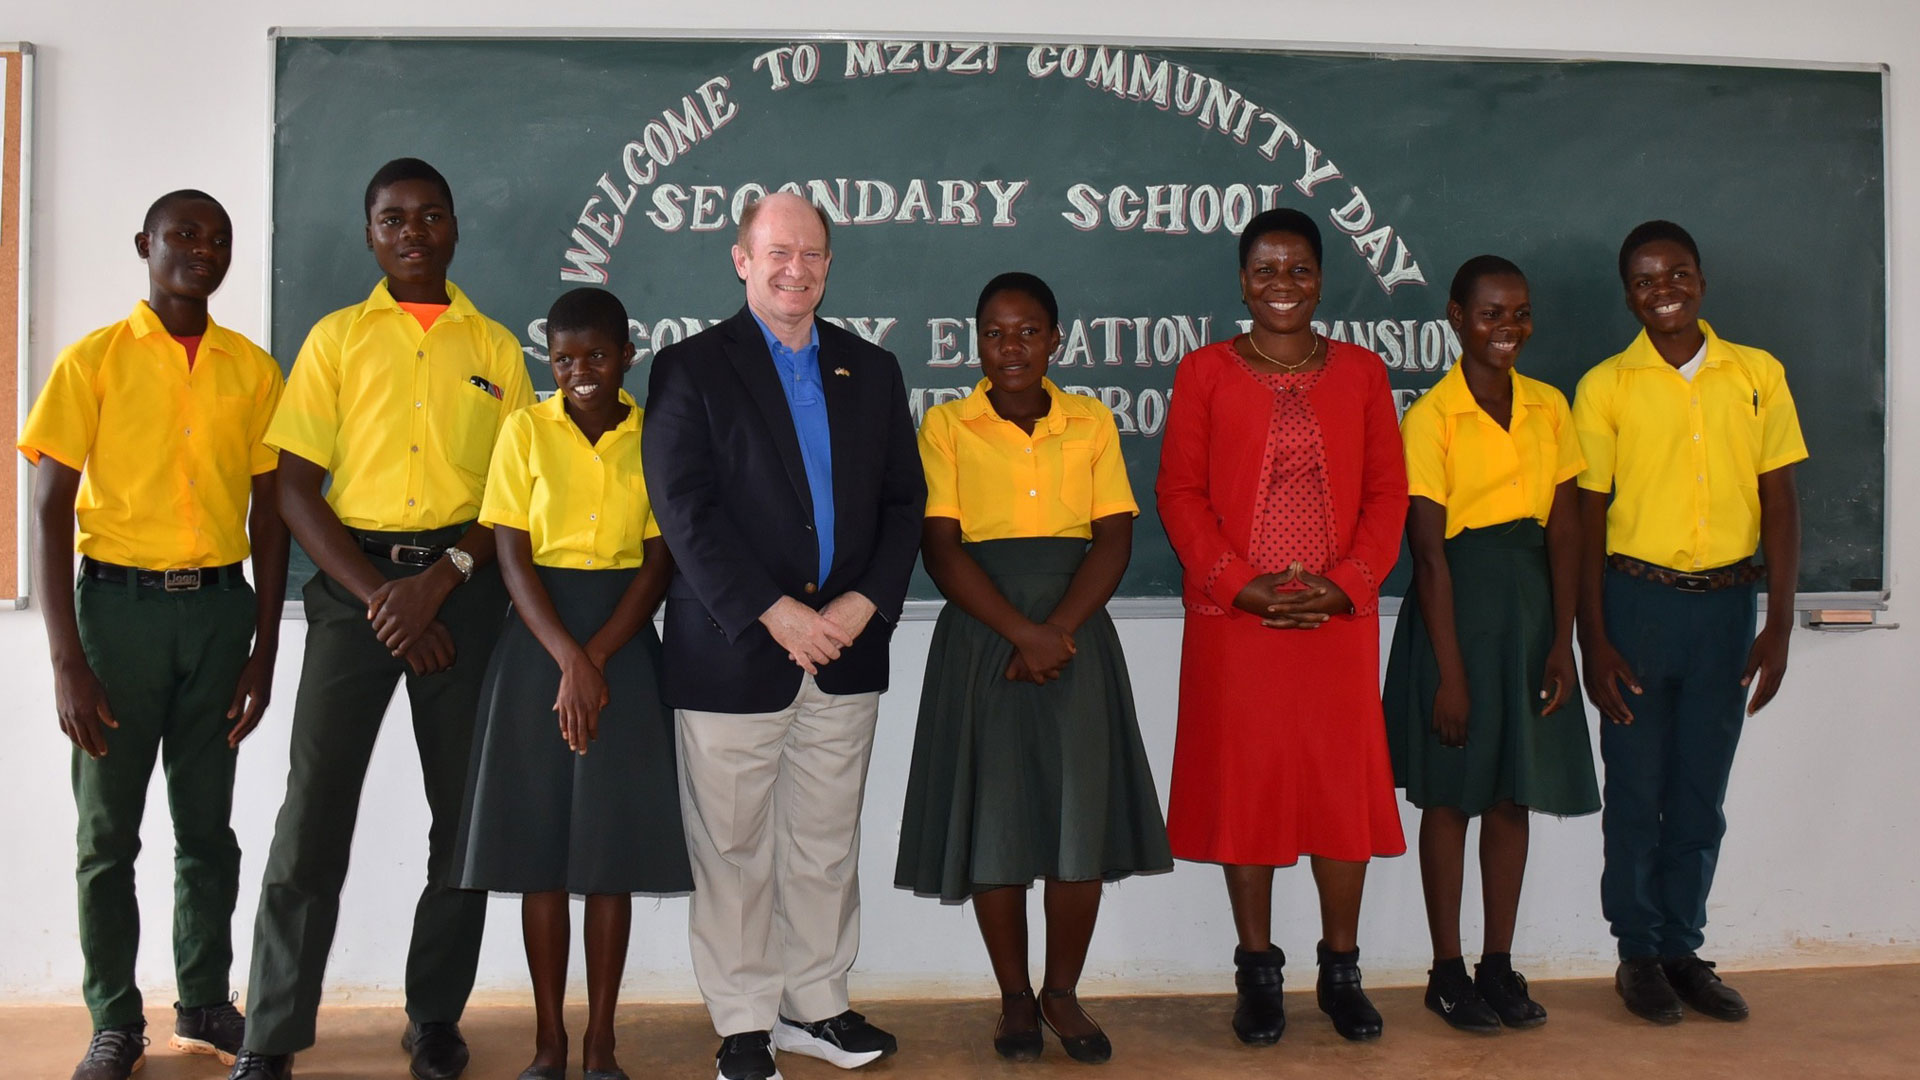 U.S. Senator Chris Coons of Delaware with students and teachers at the Mzuzi Community Day Secondary School